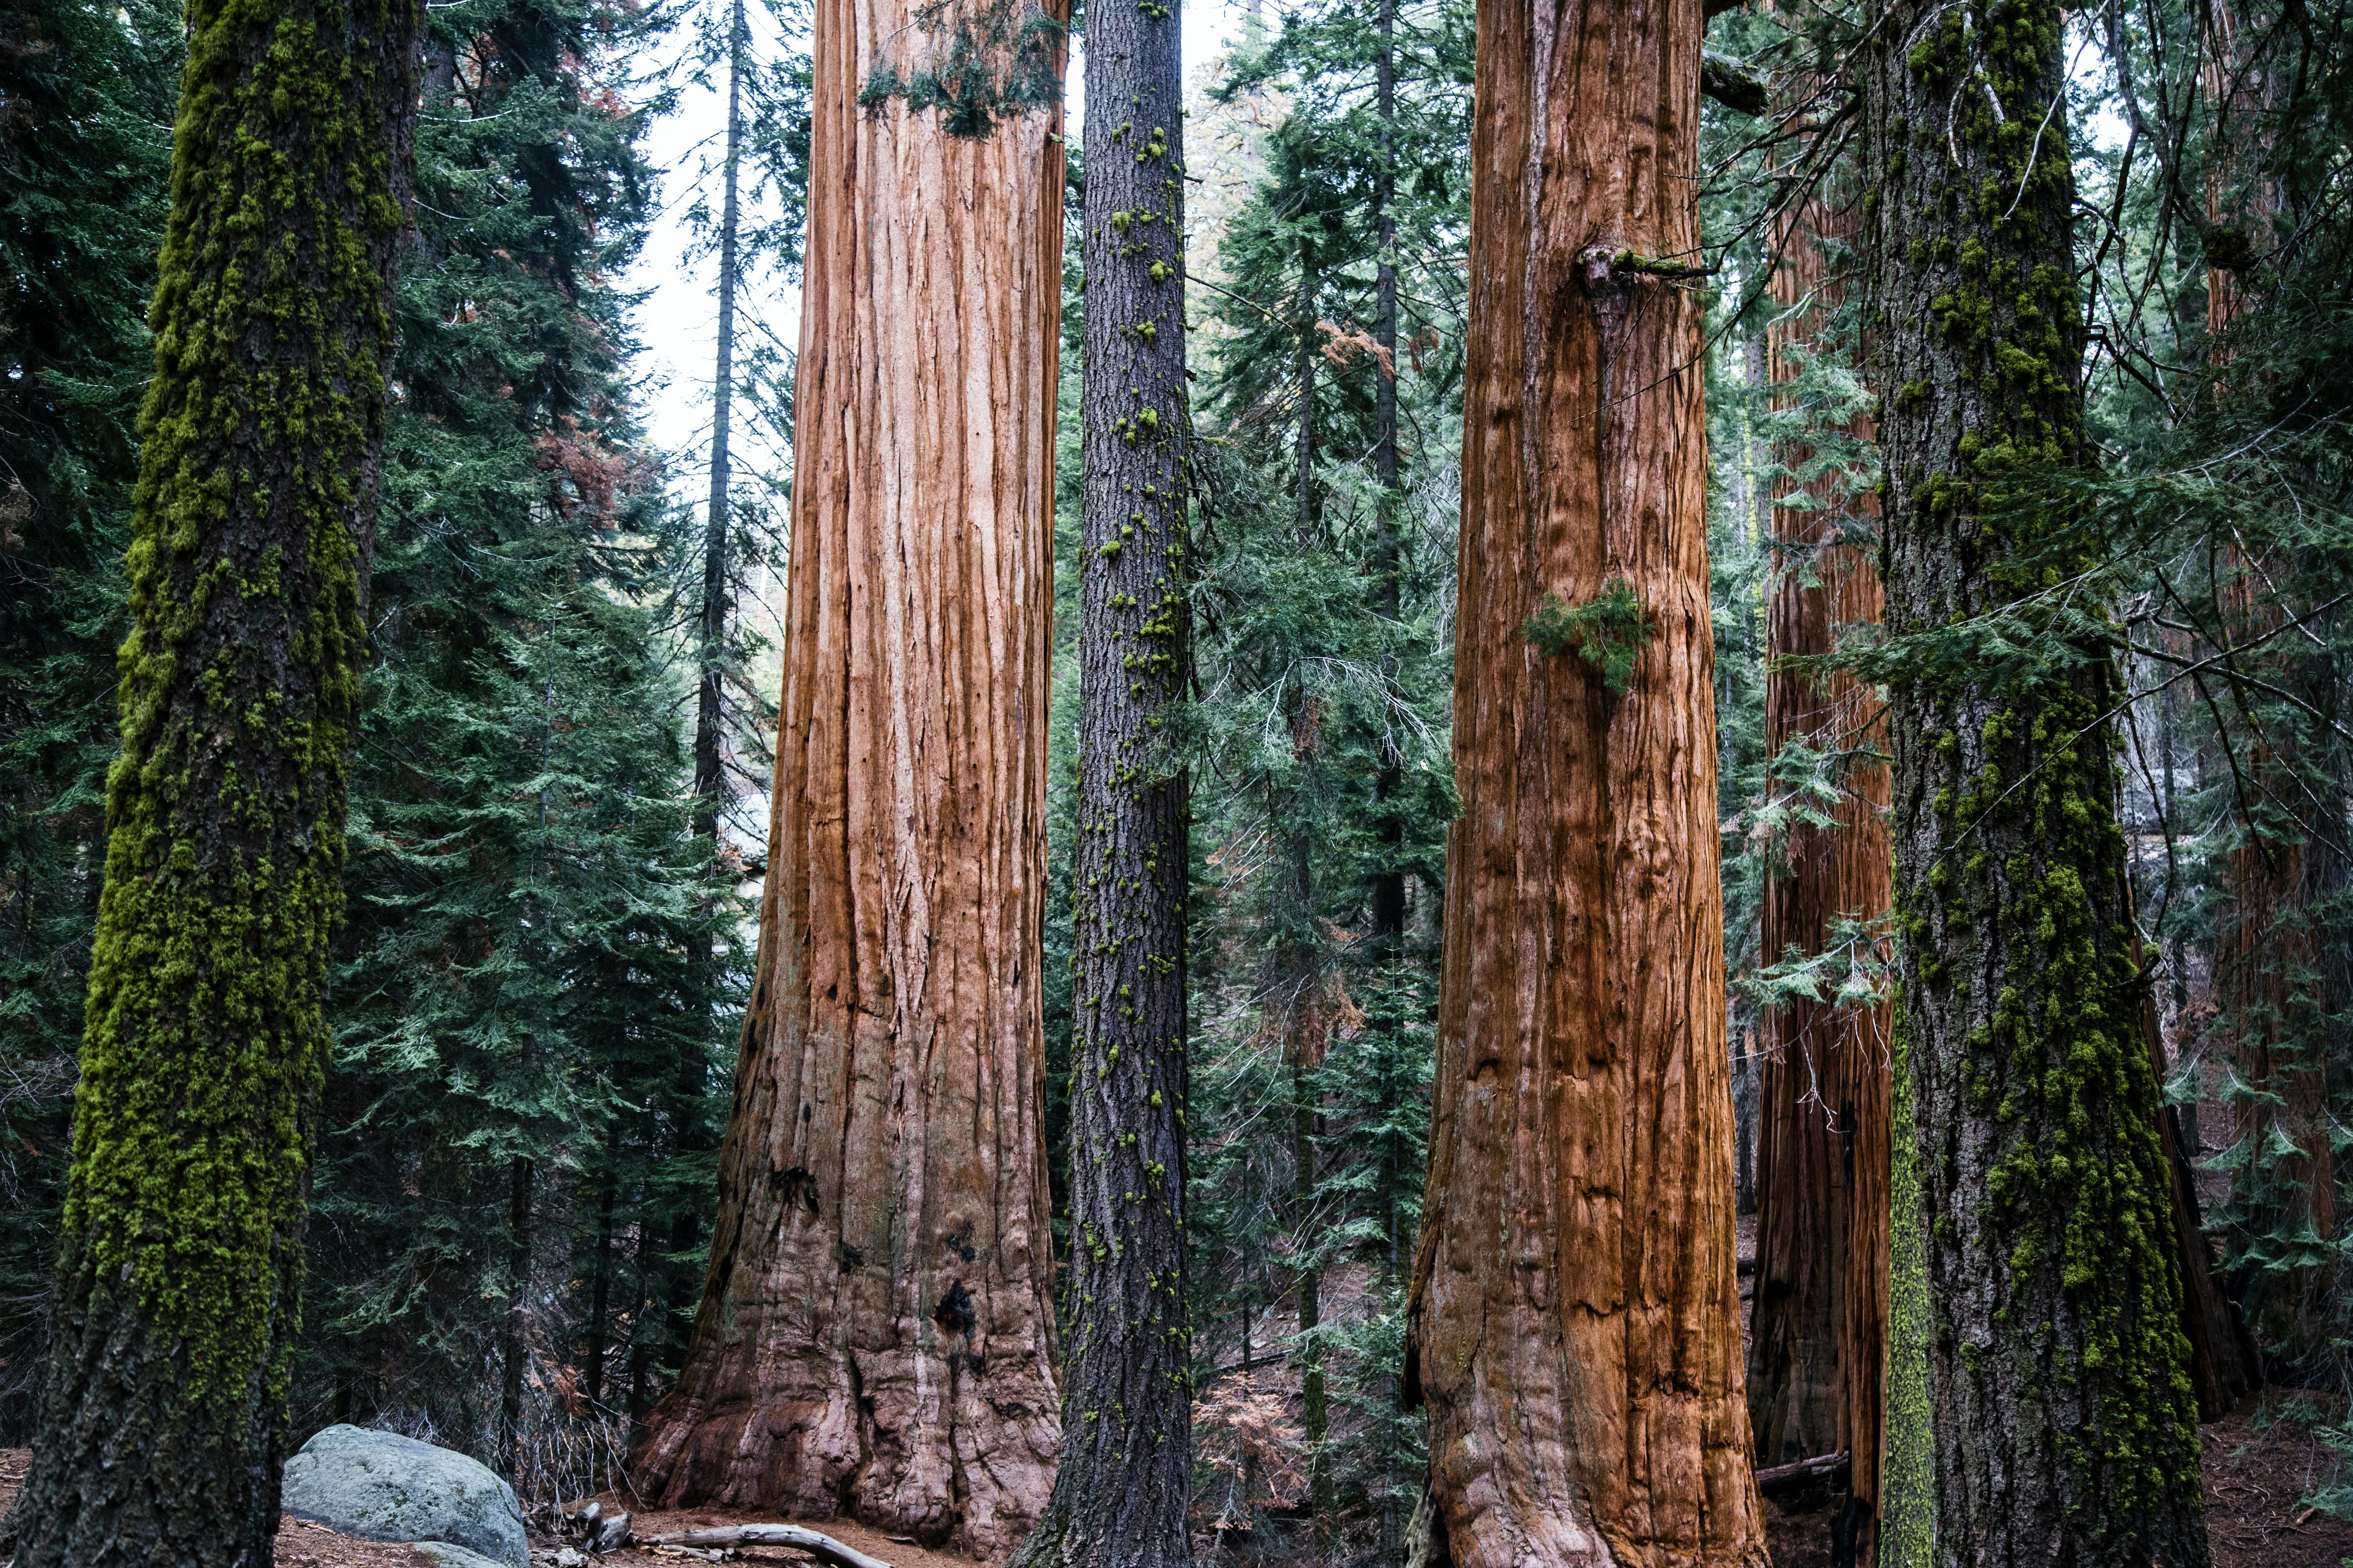 A grove of redwood trees